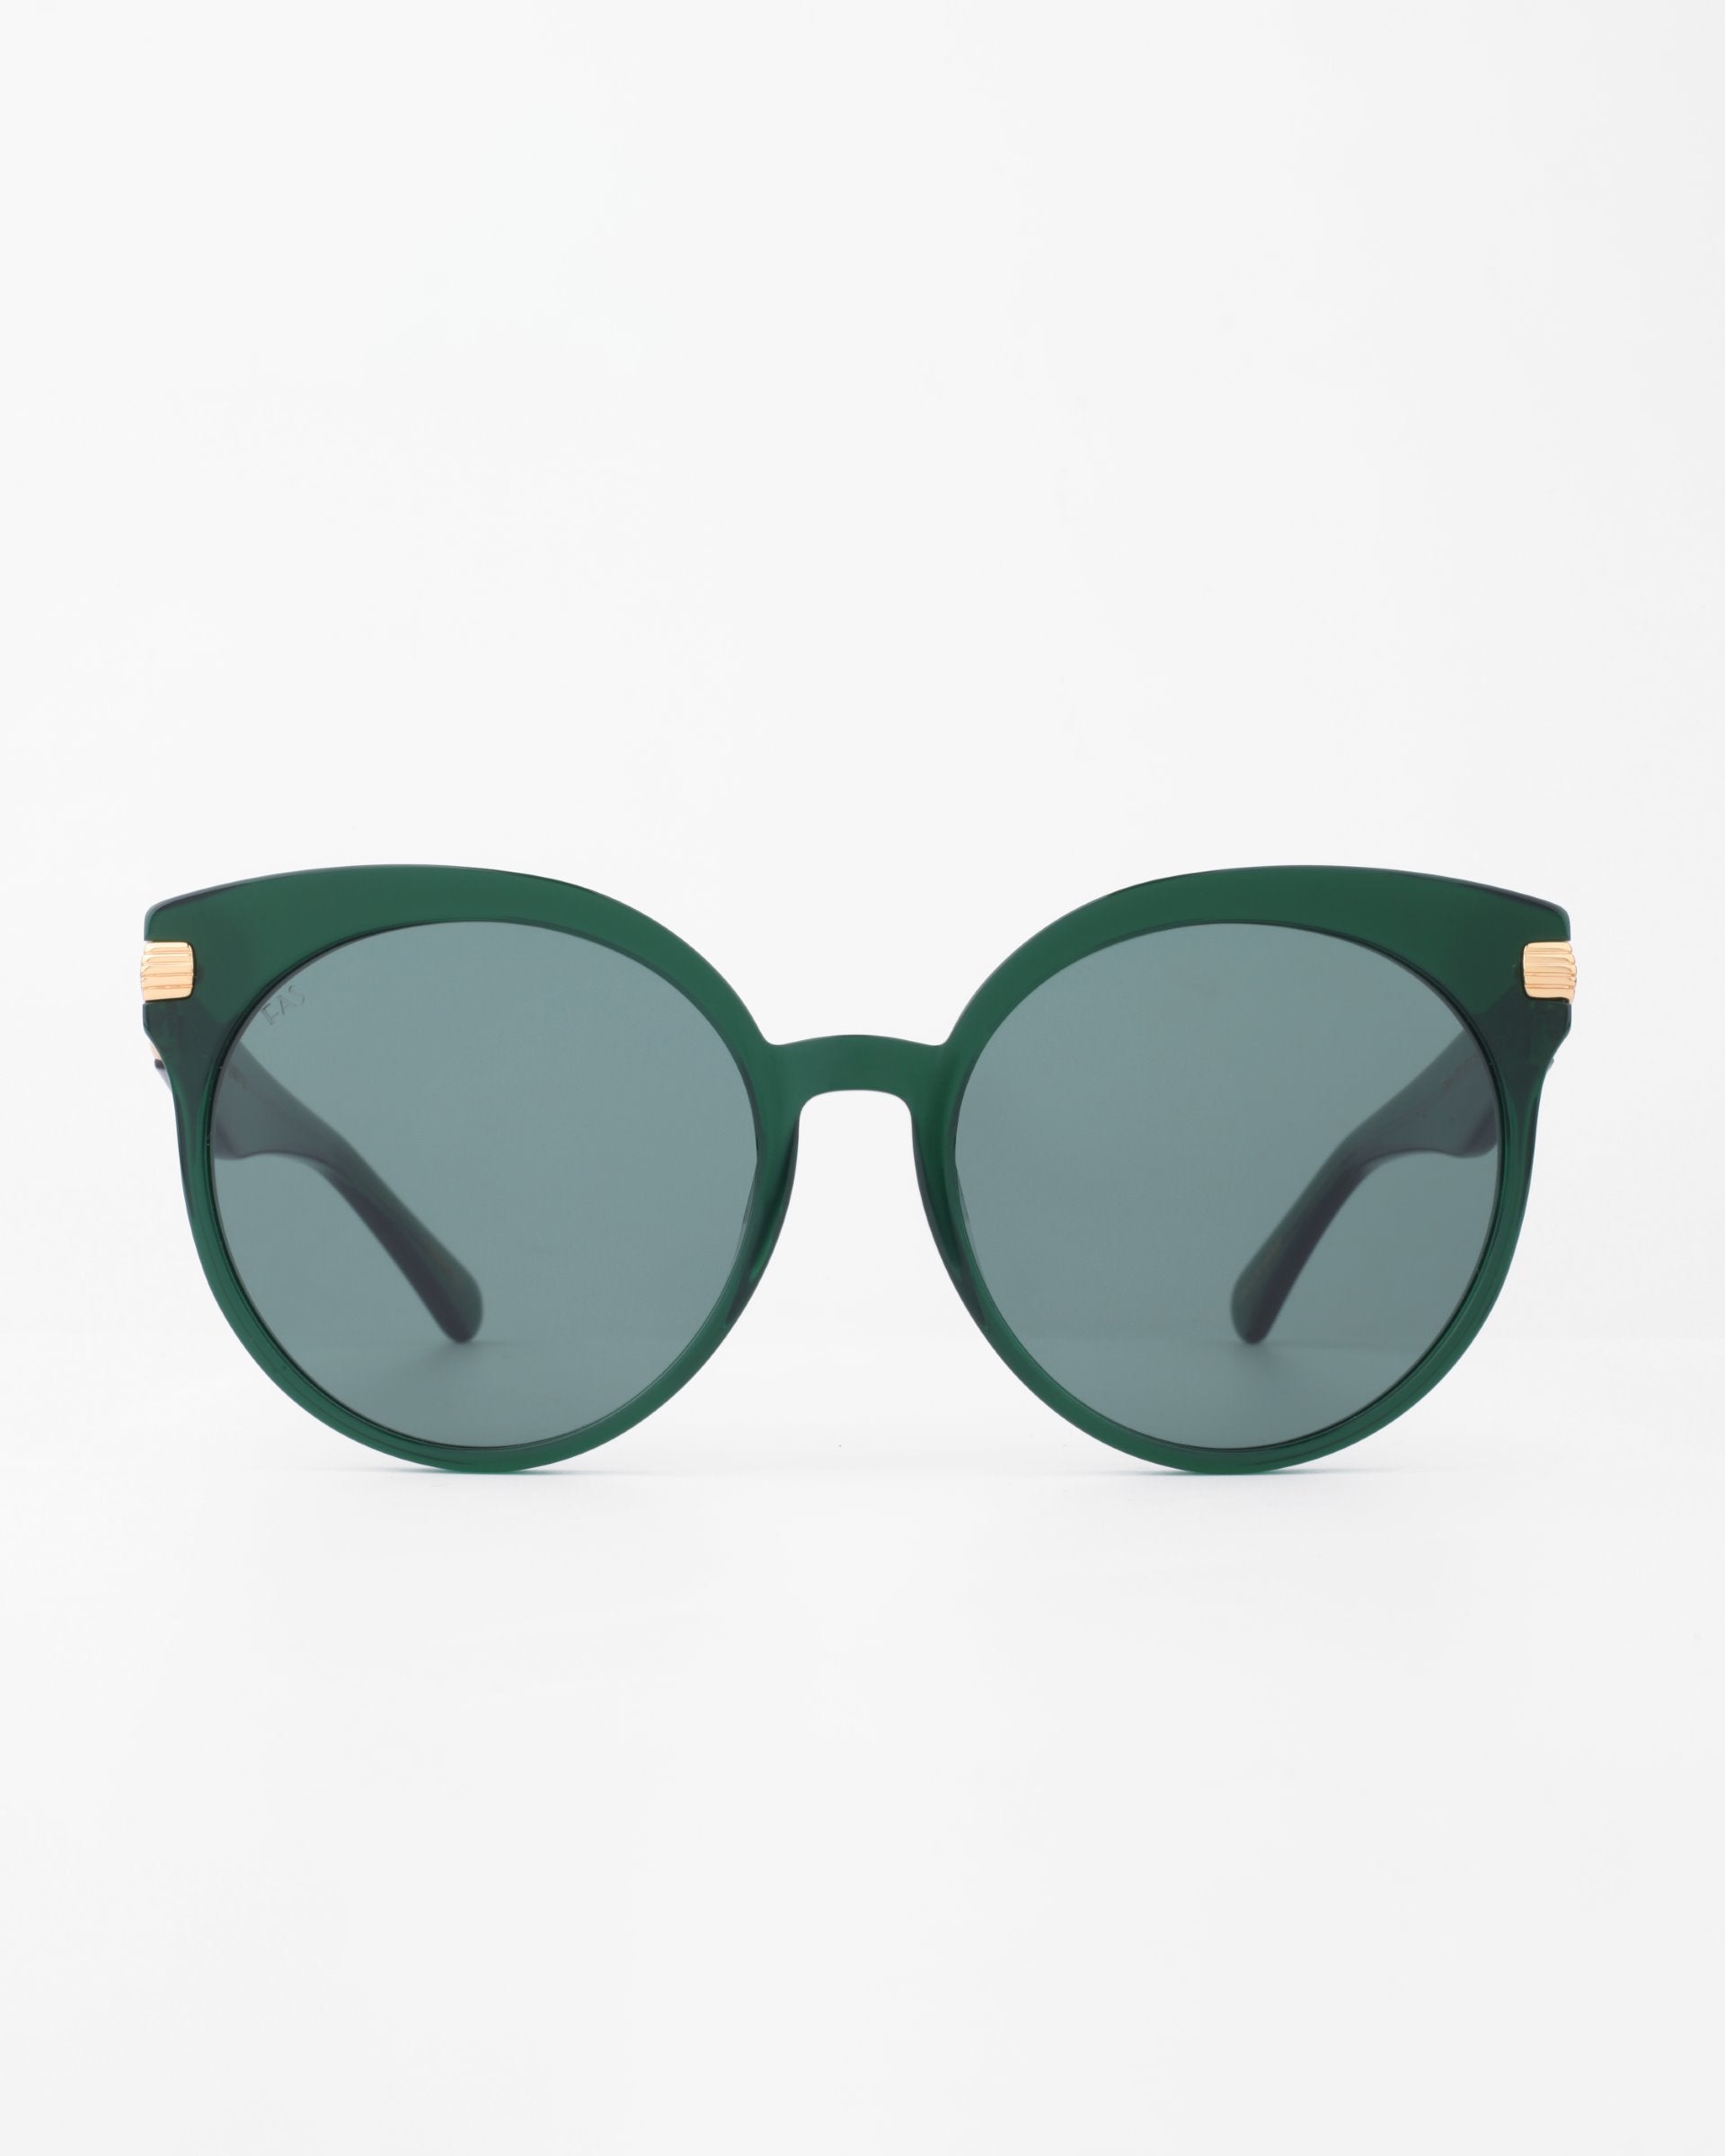 Front view of a pair of dark green round sunglasses called Muse by For Art's Sake®, with dark tinted, shatter-resistant nylon lenses. The frame boasts a sleek design made from handmade plant-based acetate, highlighted by small 18-karat gold-plated accents on the temples. The background is plain white, emphasizing the stylish eyewear.